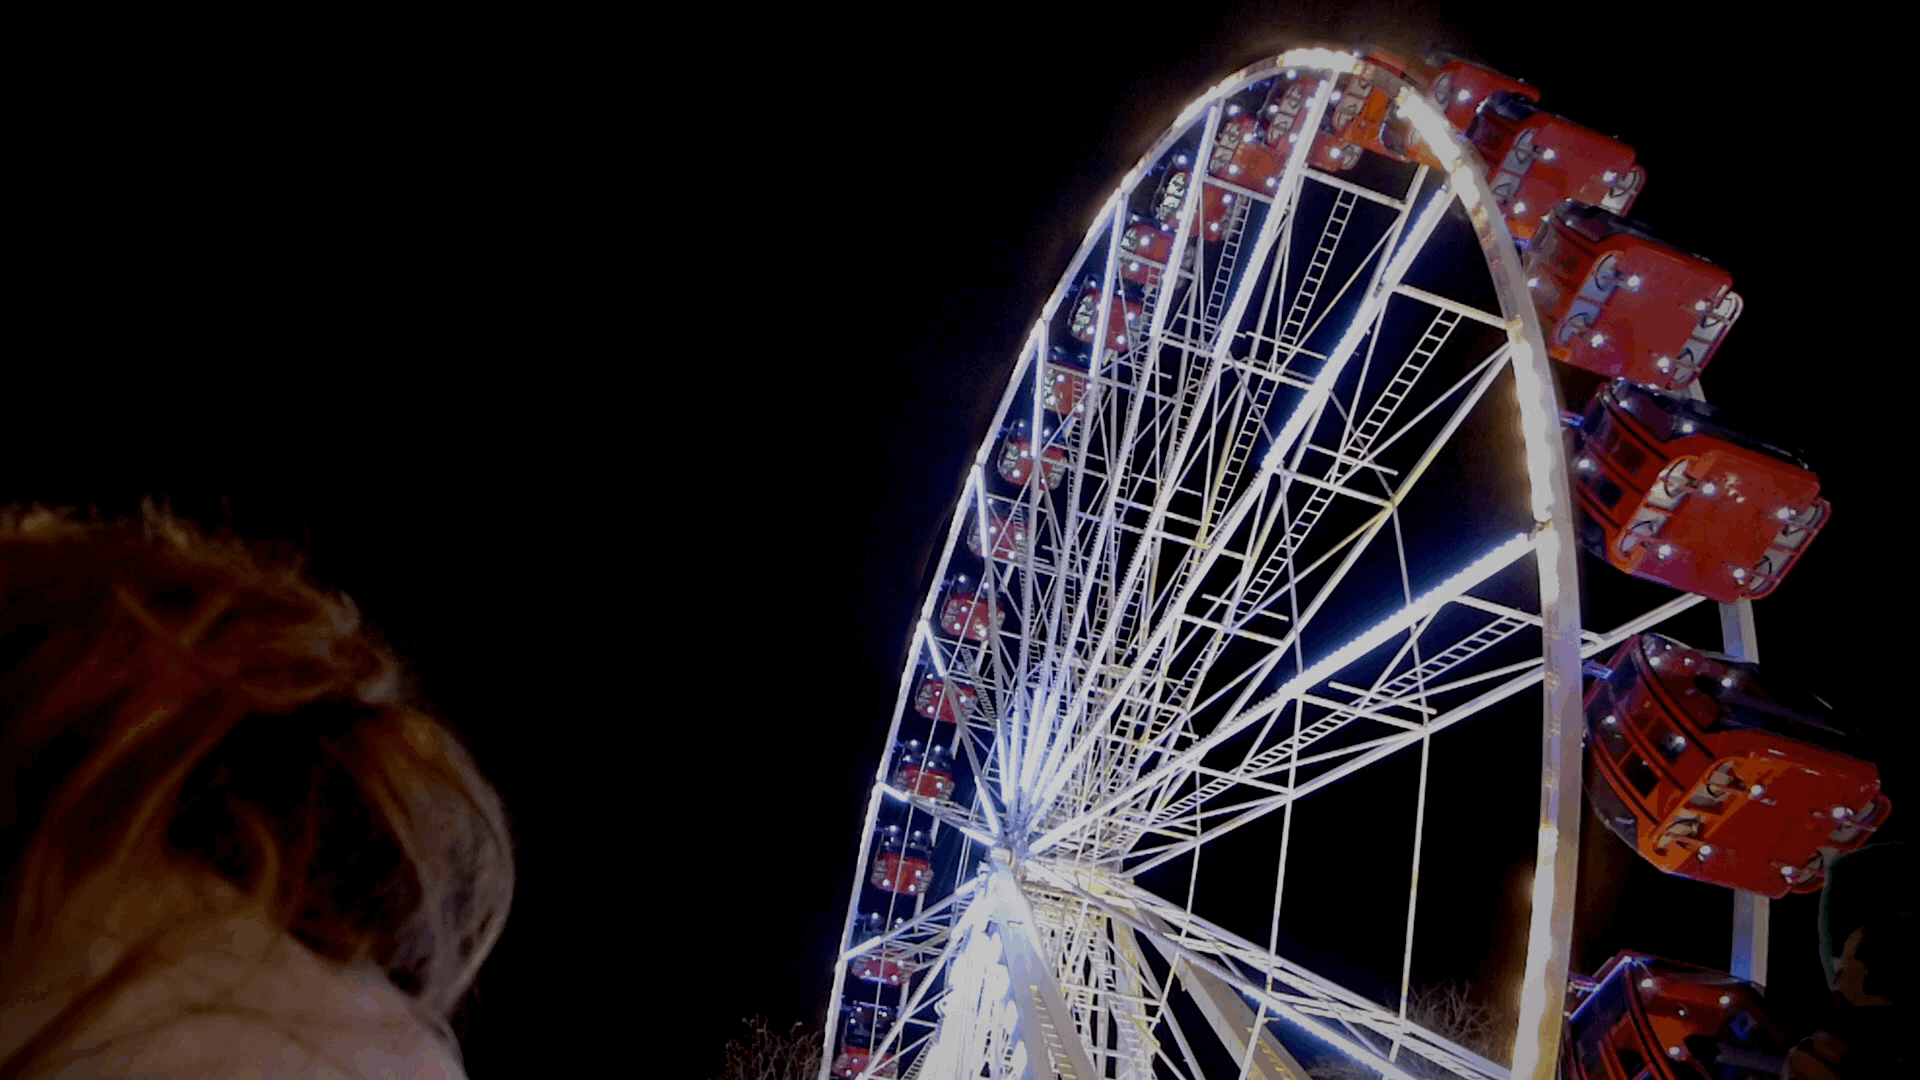 View, Download, Rate, and Comment on this Ferris Wheel Gif. gif,gifs,animat...